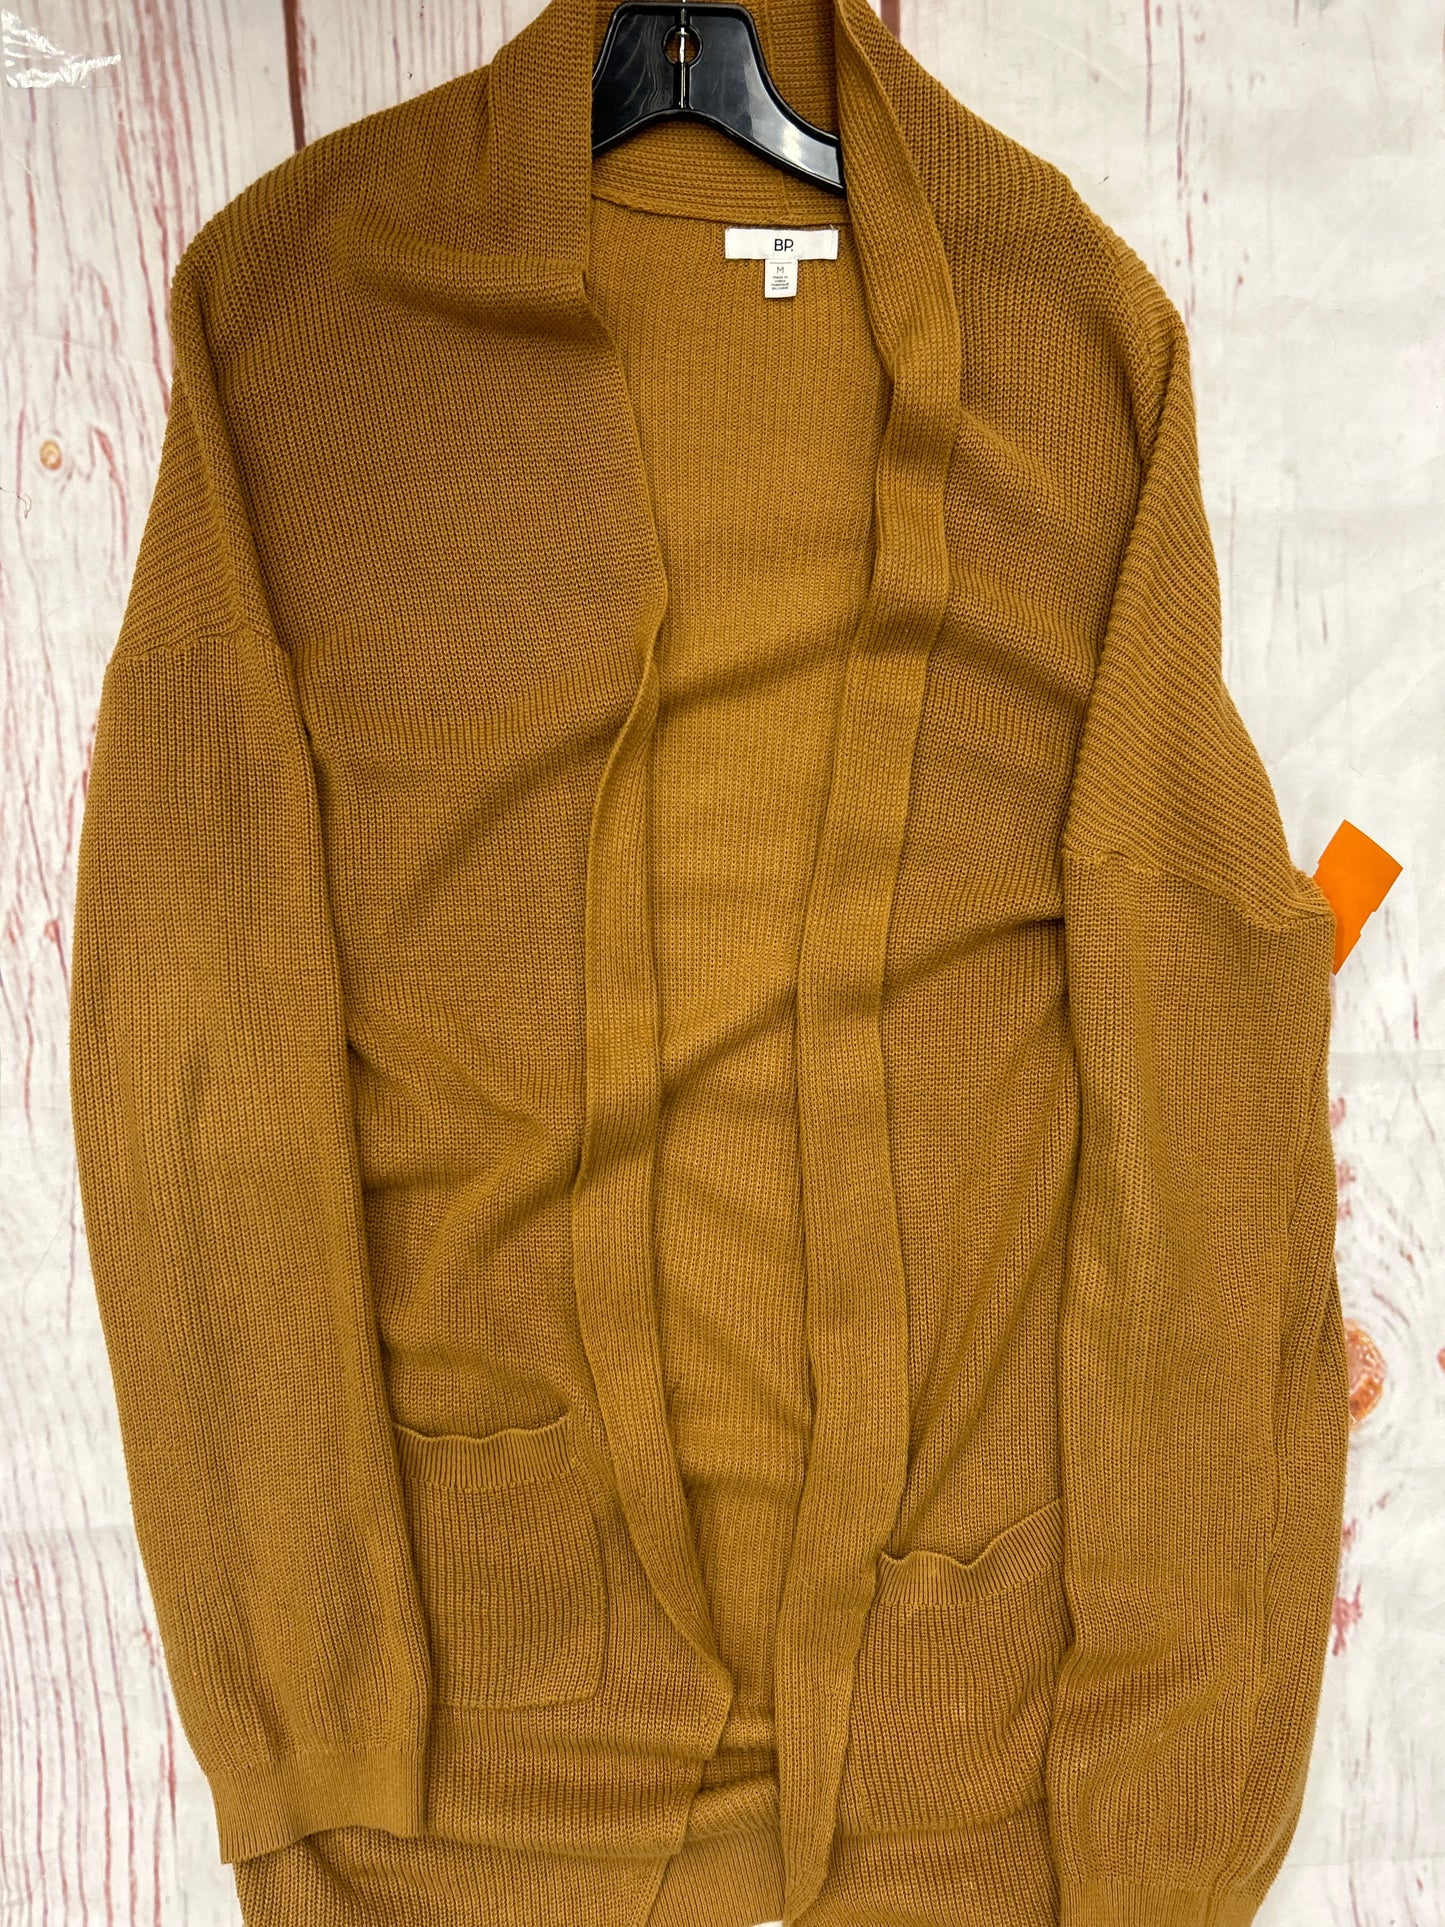 Cardigan By Bp  Size: M